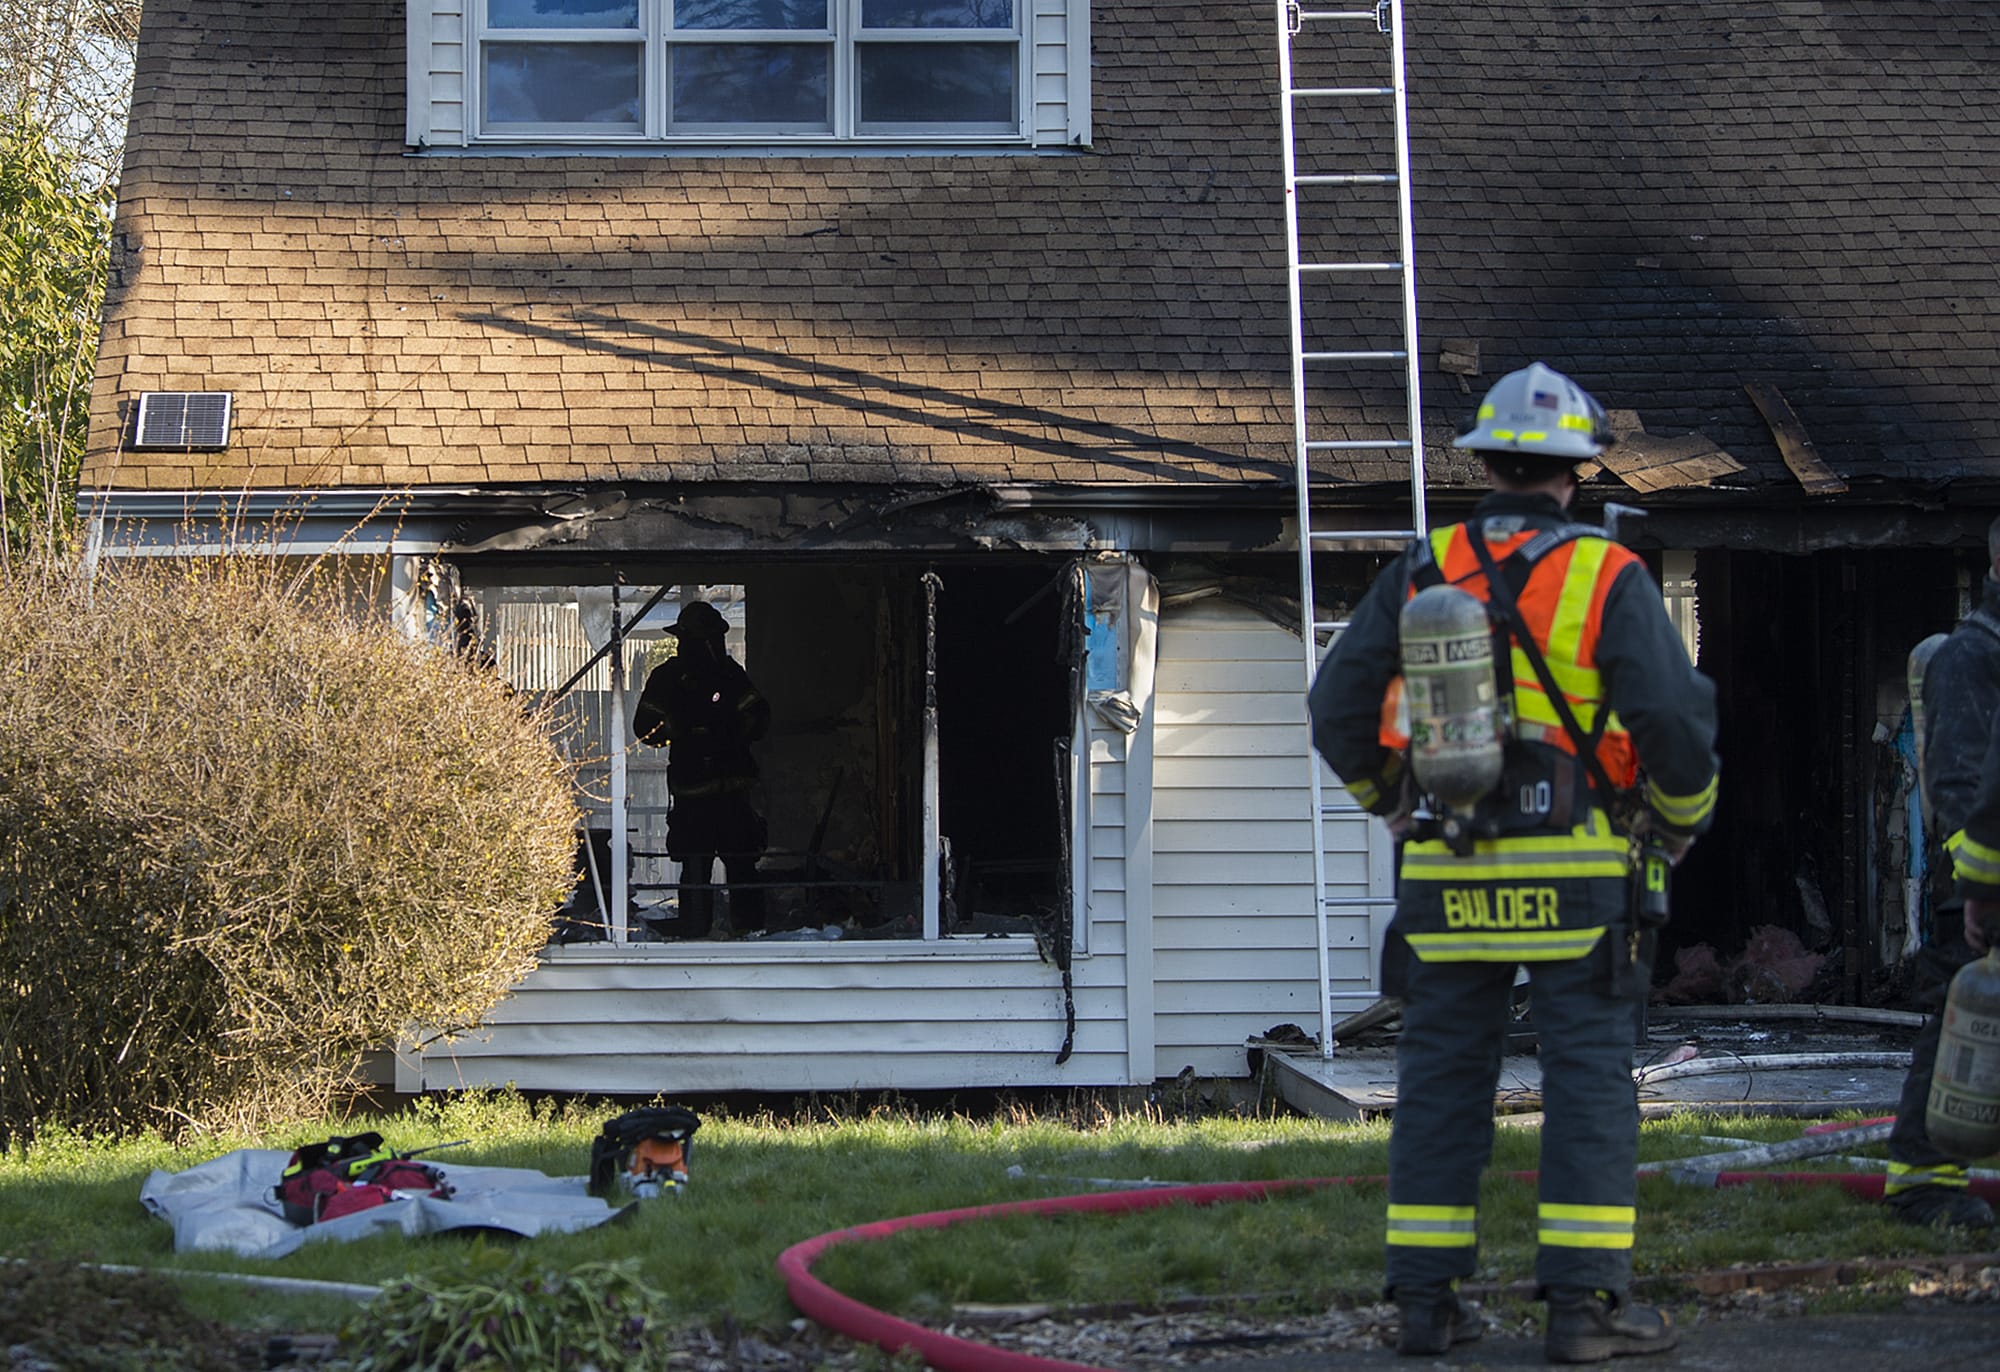 A firefighter, left, uses a flashlight to look over damage to a home in Salmon Creek after a fire gutted the residence on Friday morning, Feb. 21, 2020.